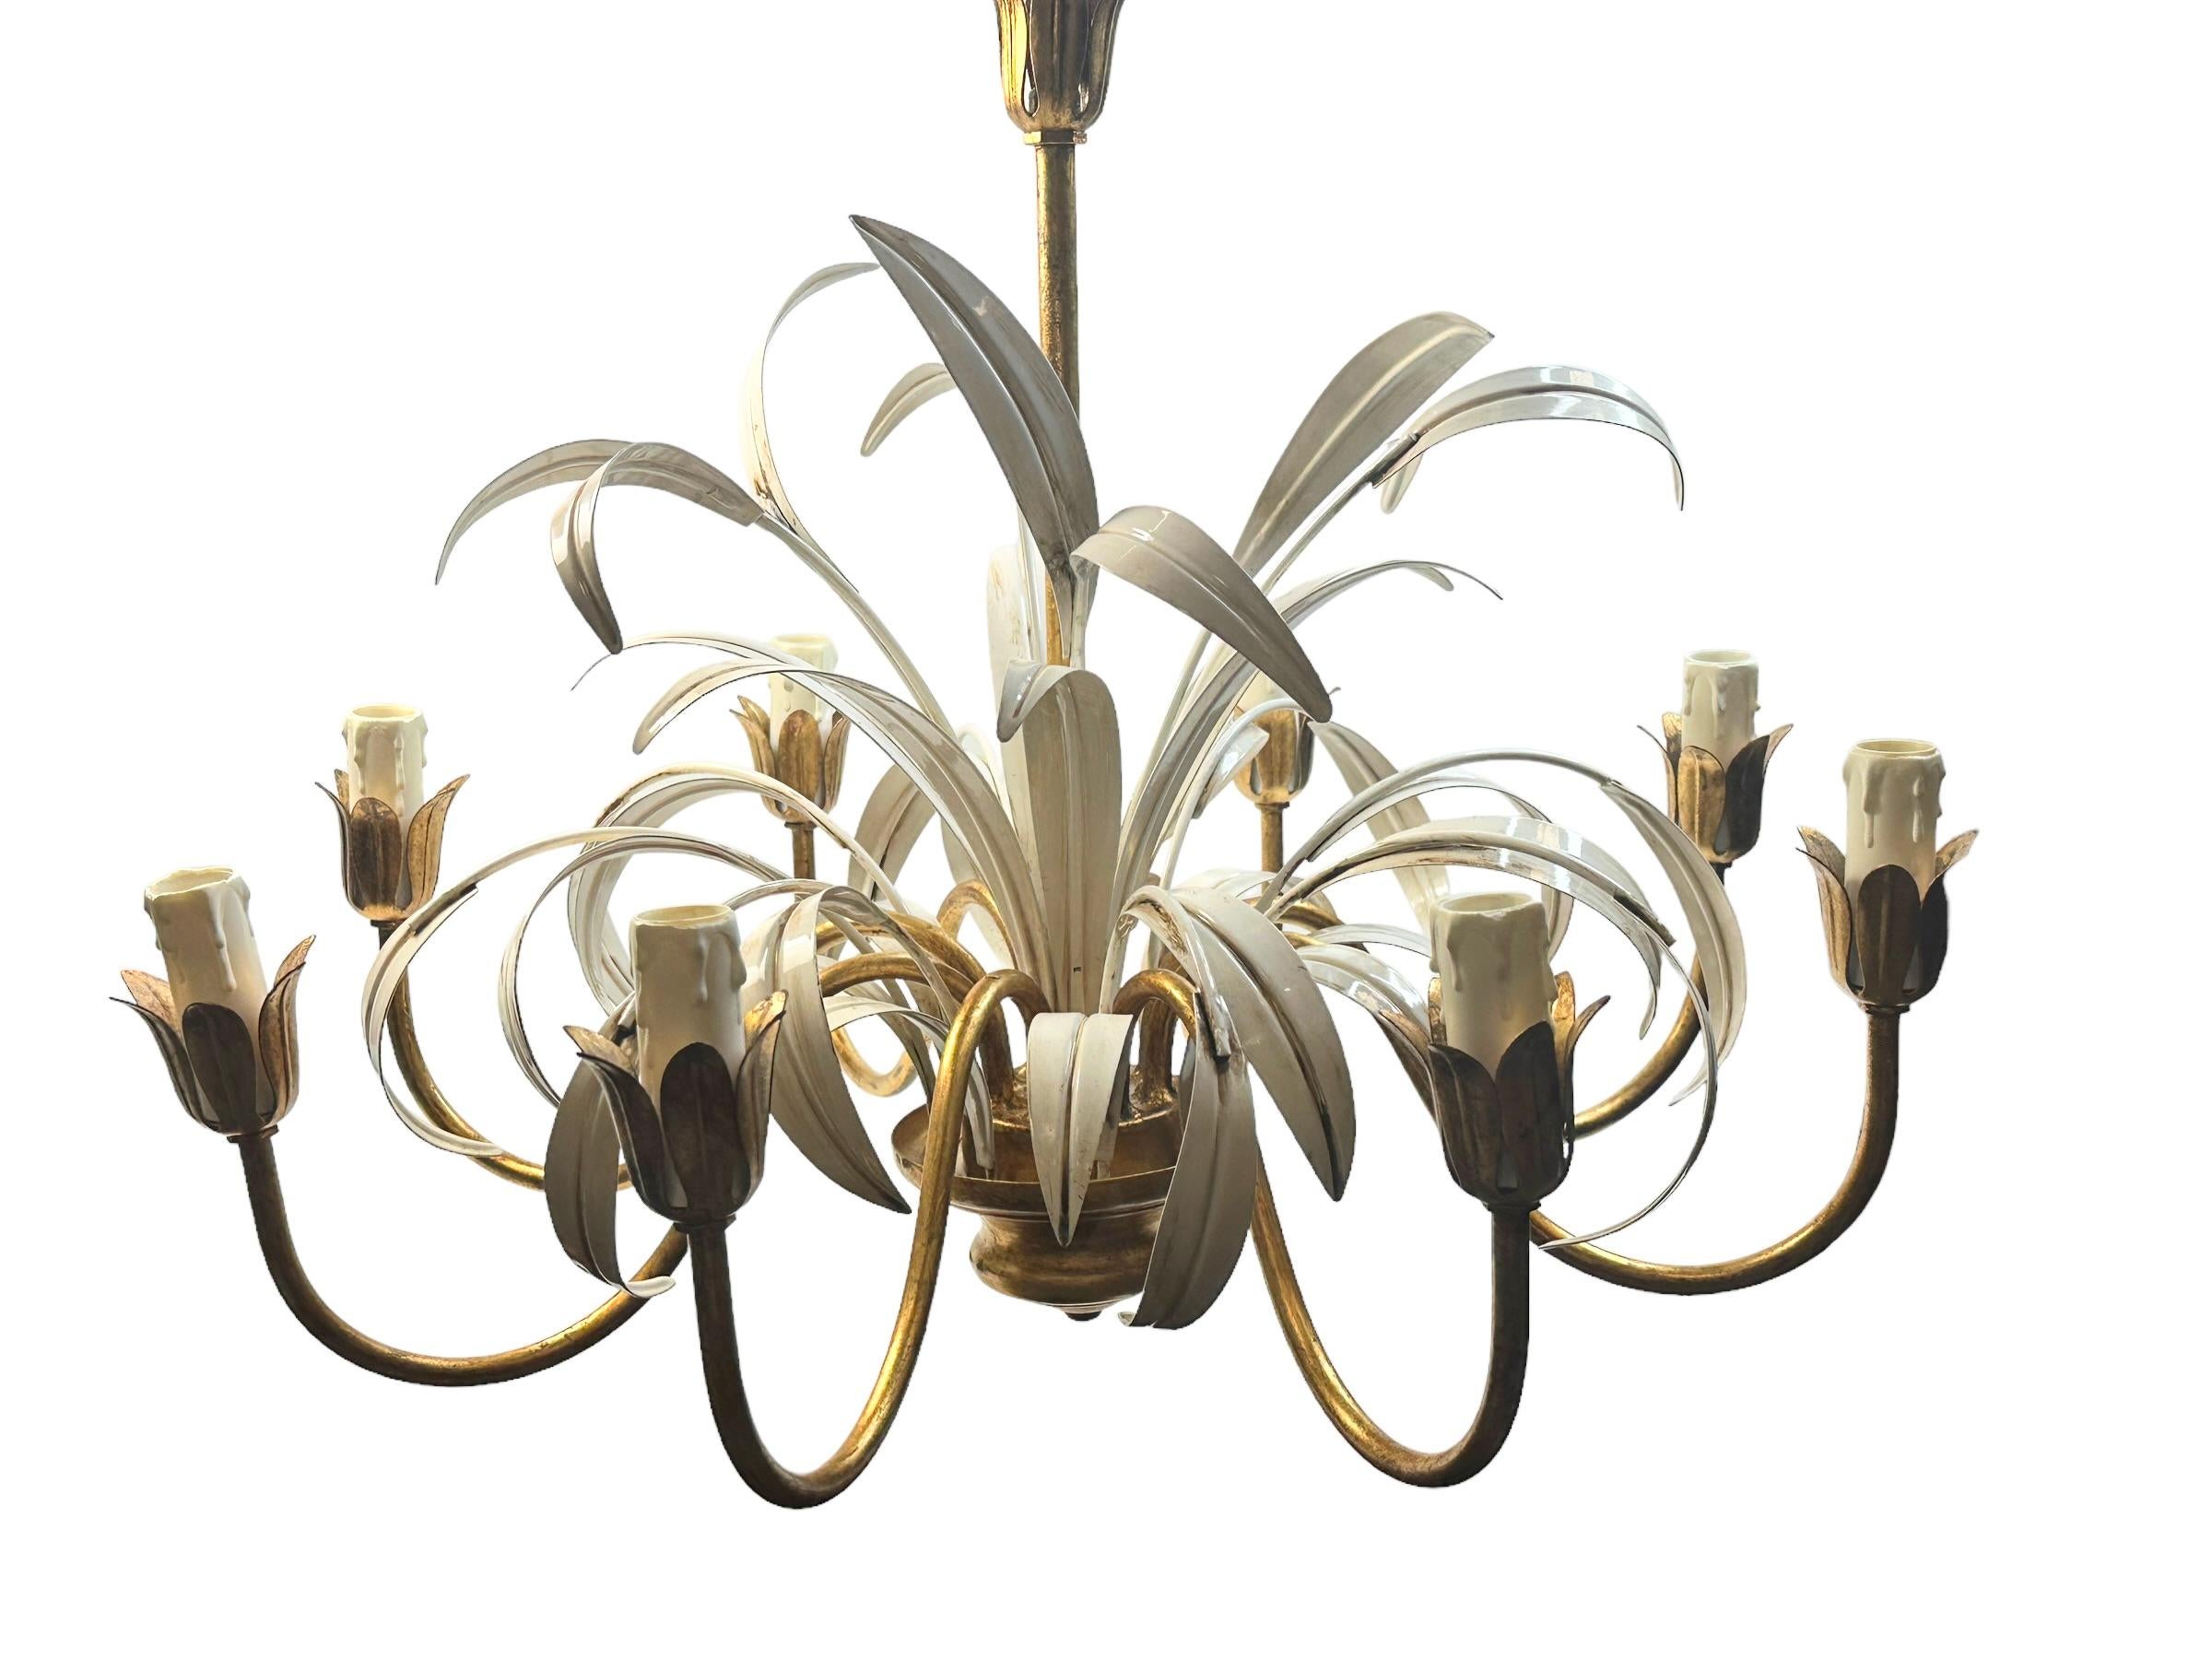 8-Light Gilt Metal Reed Leaf Chandelier Tole Toleware Coco Chanel Style, Italy In Good Condition For Sale In Nuernberg, DE